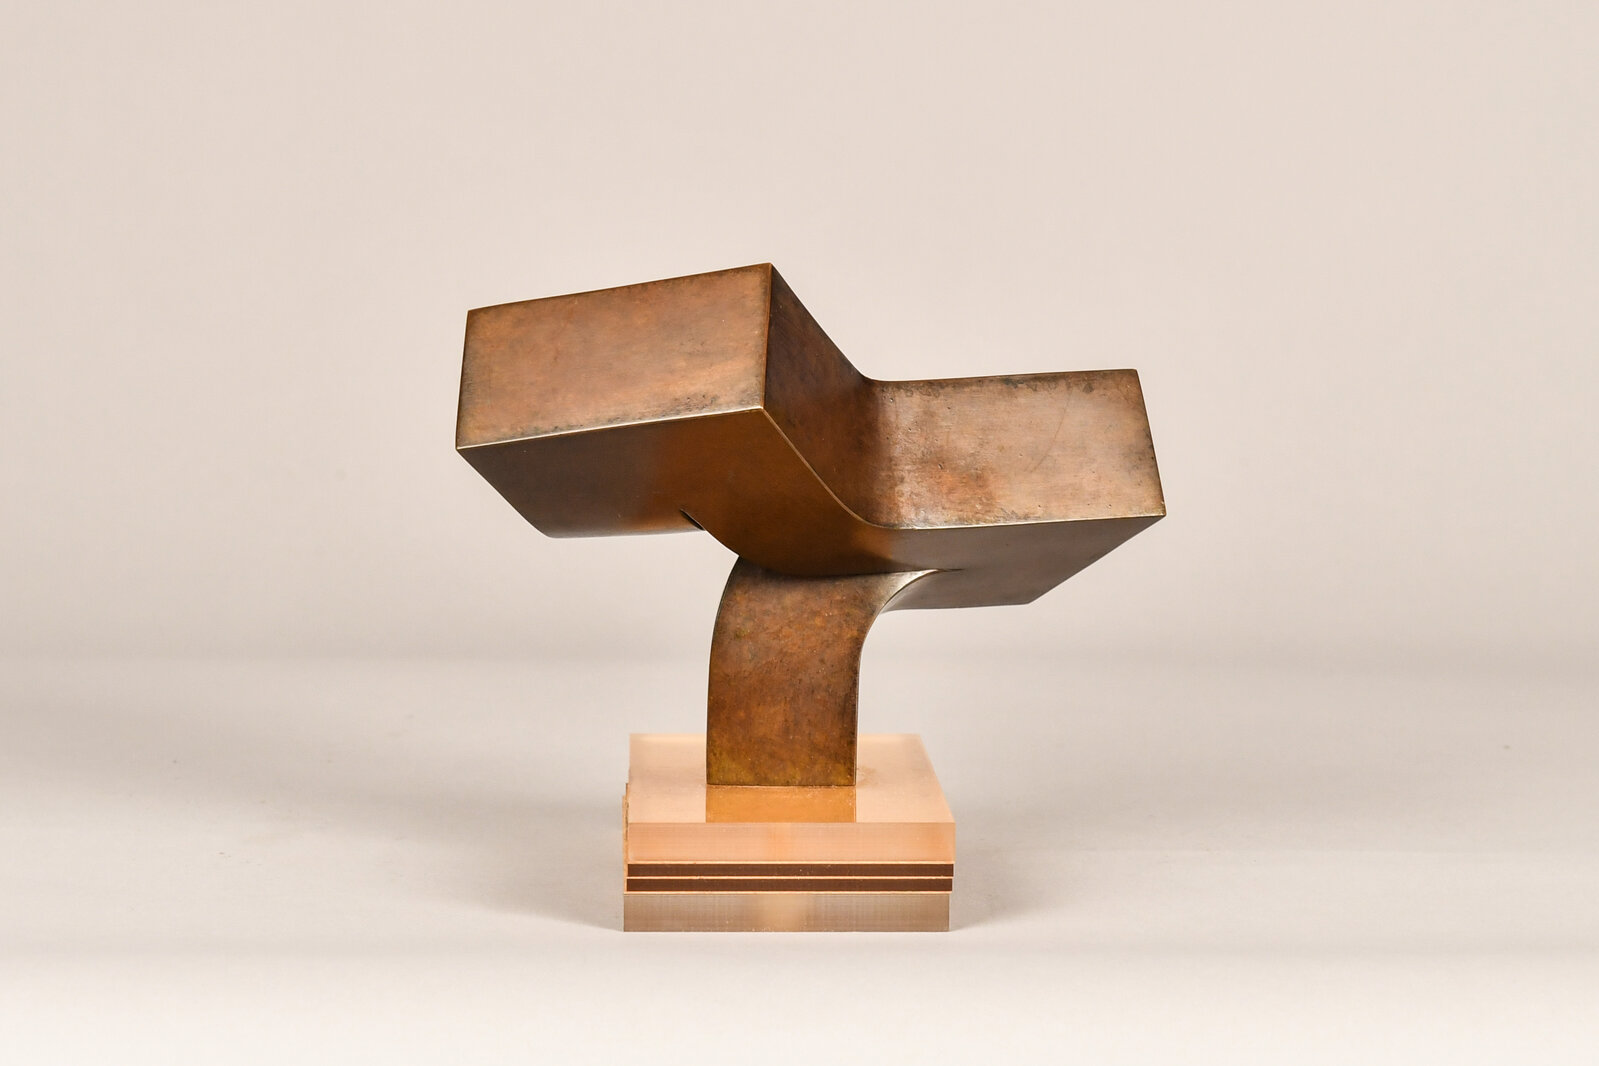 Clement Meadmore | Branching Out (1981) | Available for Sale | Artsy